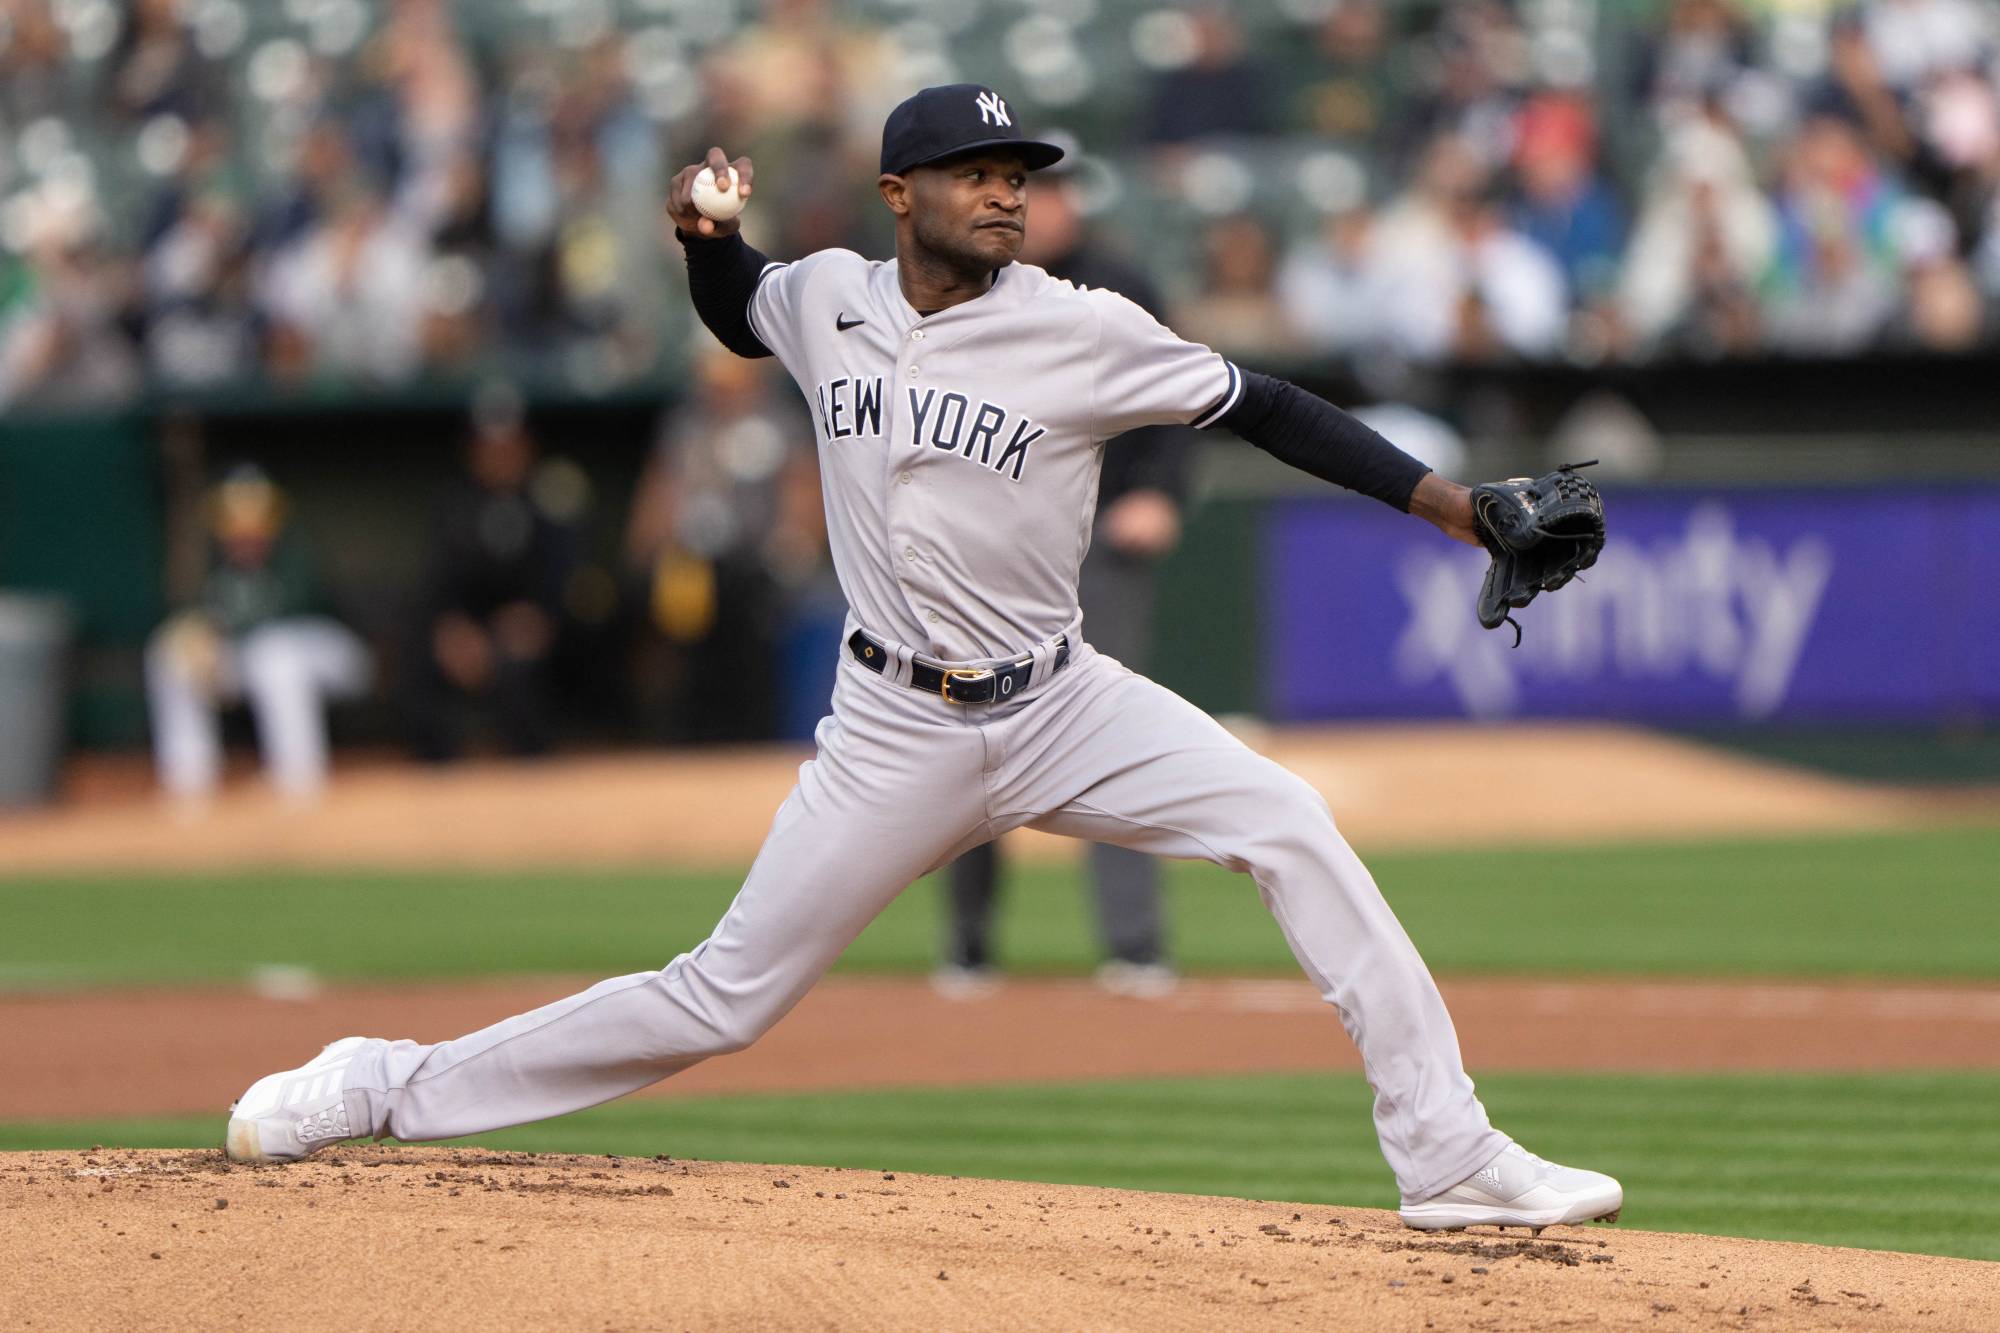 Yankees' Domingo German throws perfect game against A's - The